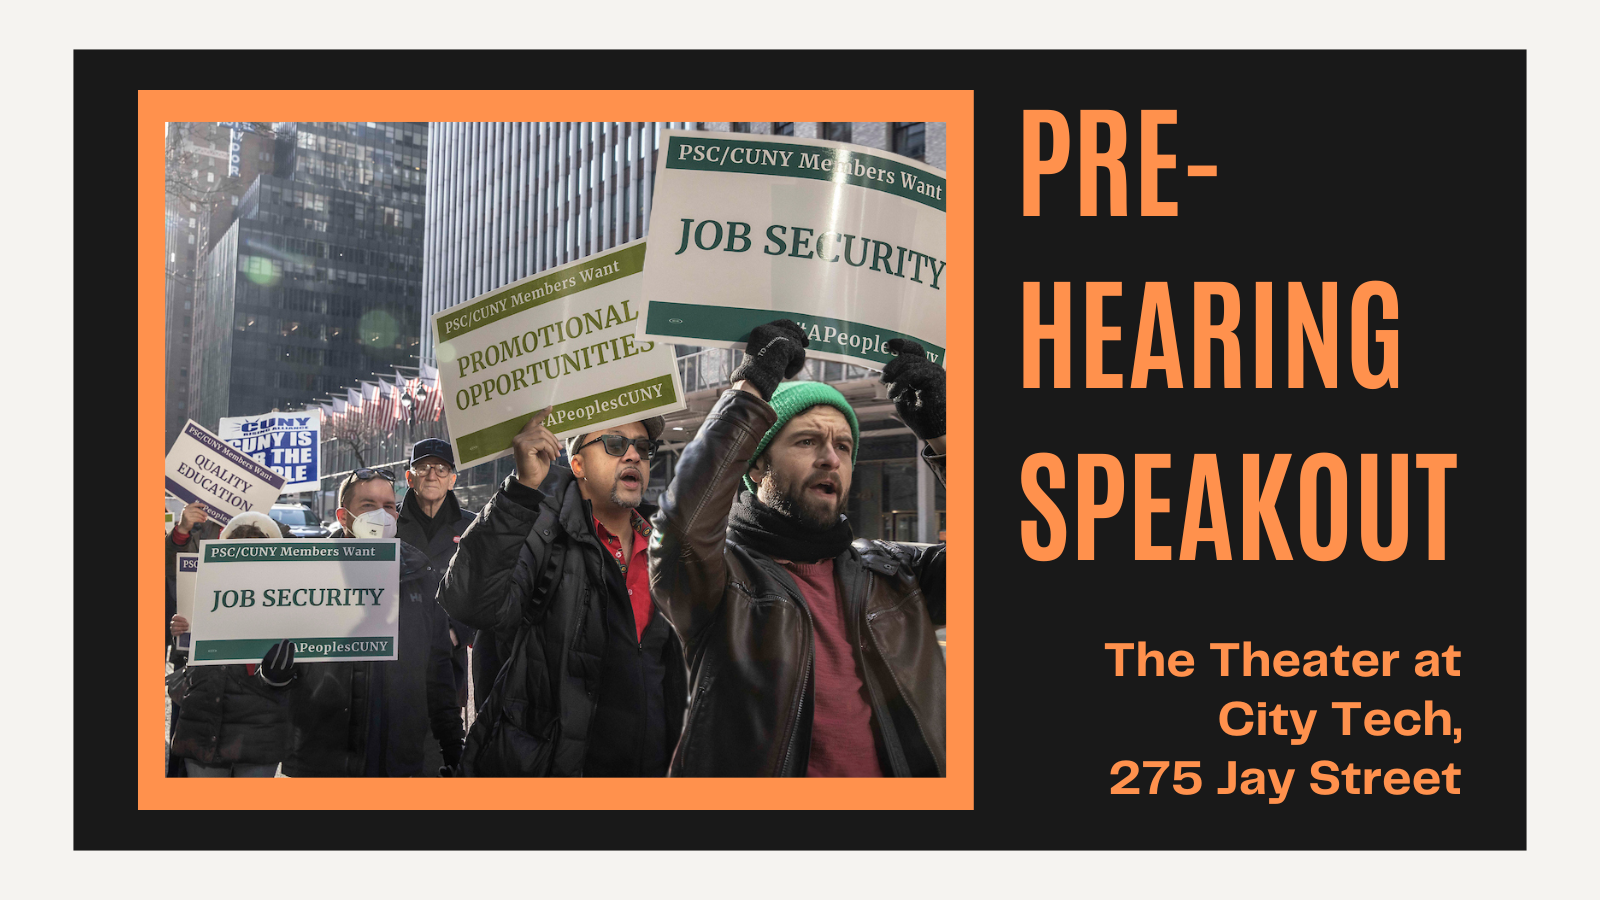 Pre-Hearing Speakout on April 1